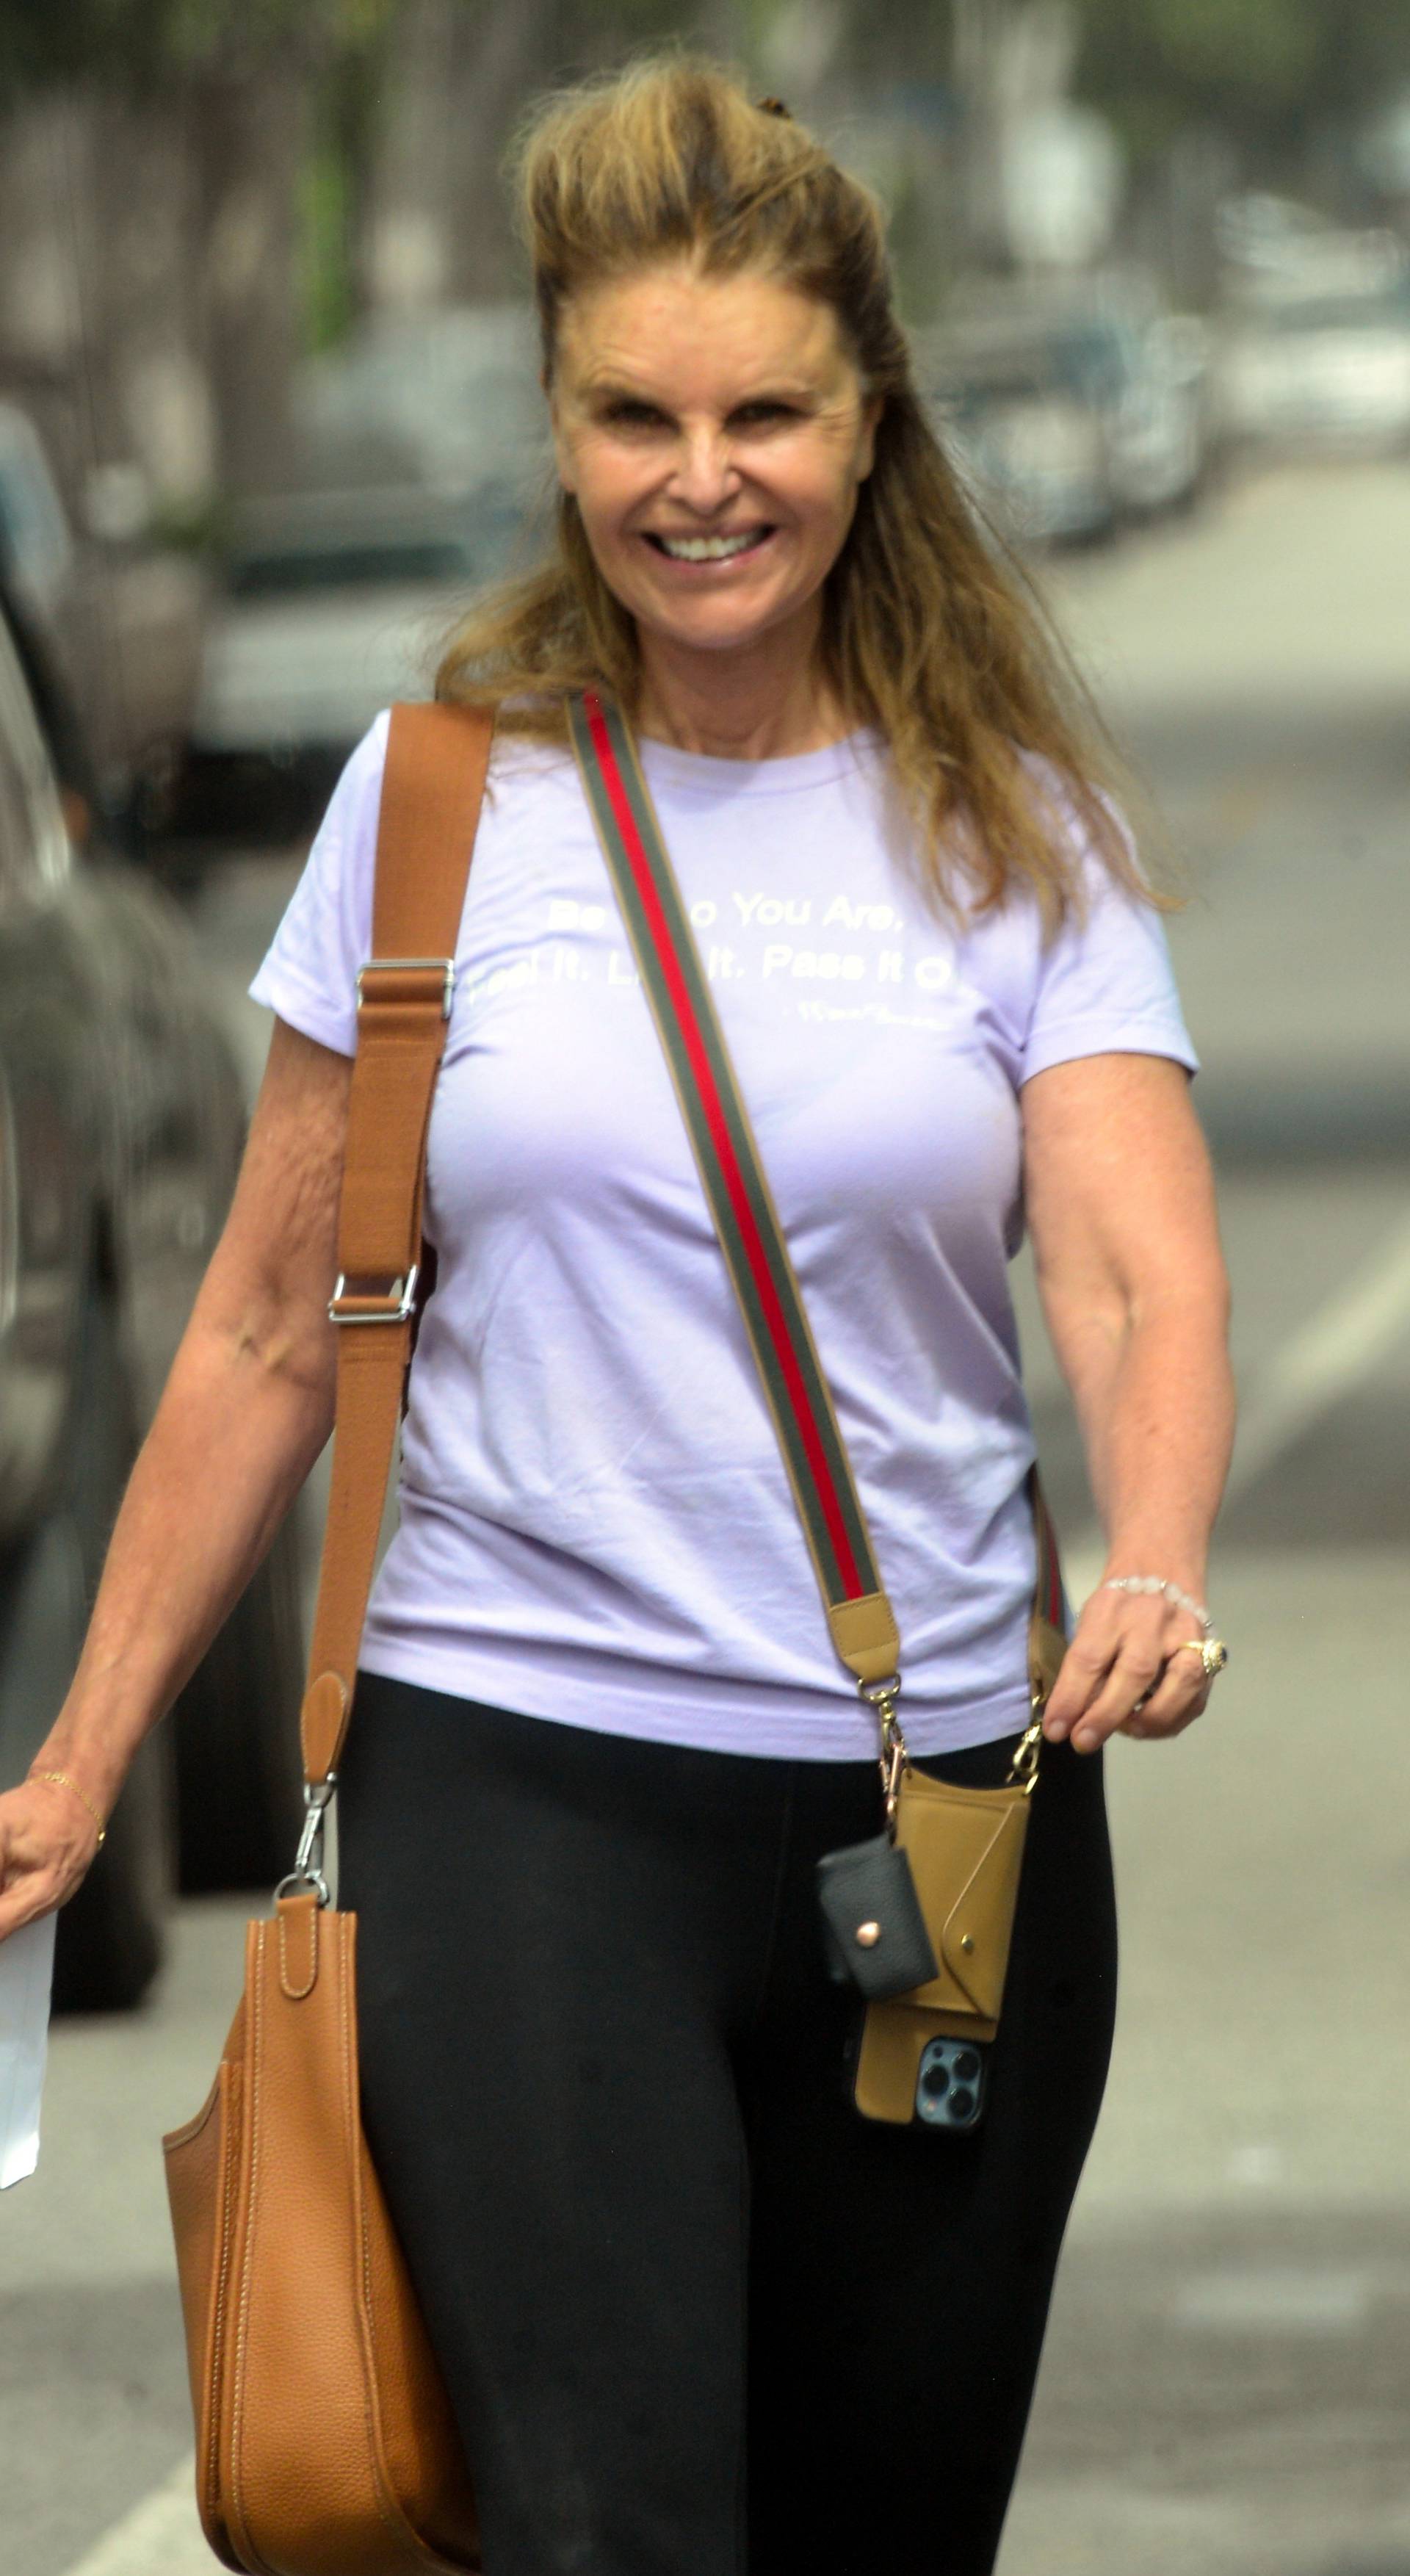 EXCLUSIVE: PREMIUM EXCLUSIVE RATES APPLY - Maria Shriver Looks Unrecognizable In Santa Monica Amidst Speculation That She Has Recently Undergone Cosmetic Surgery